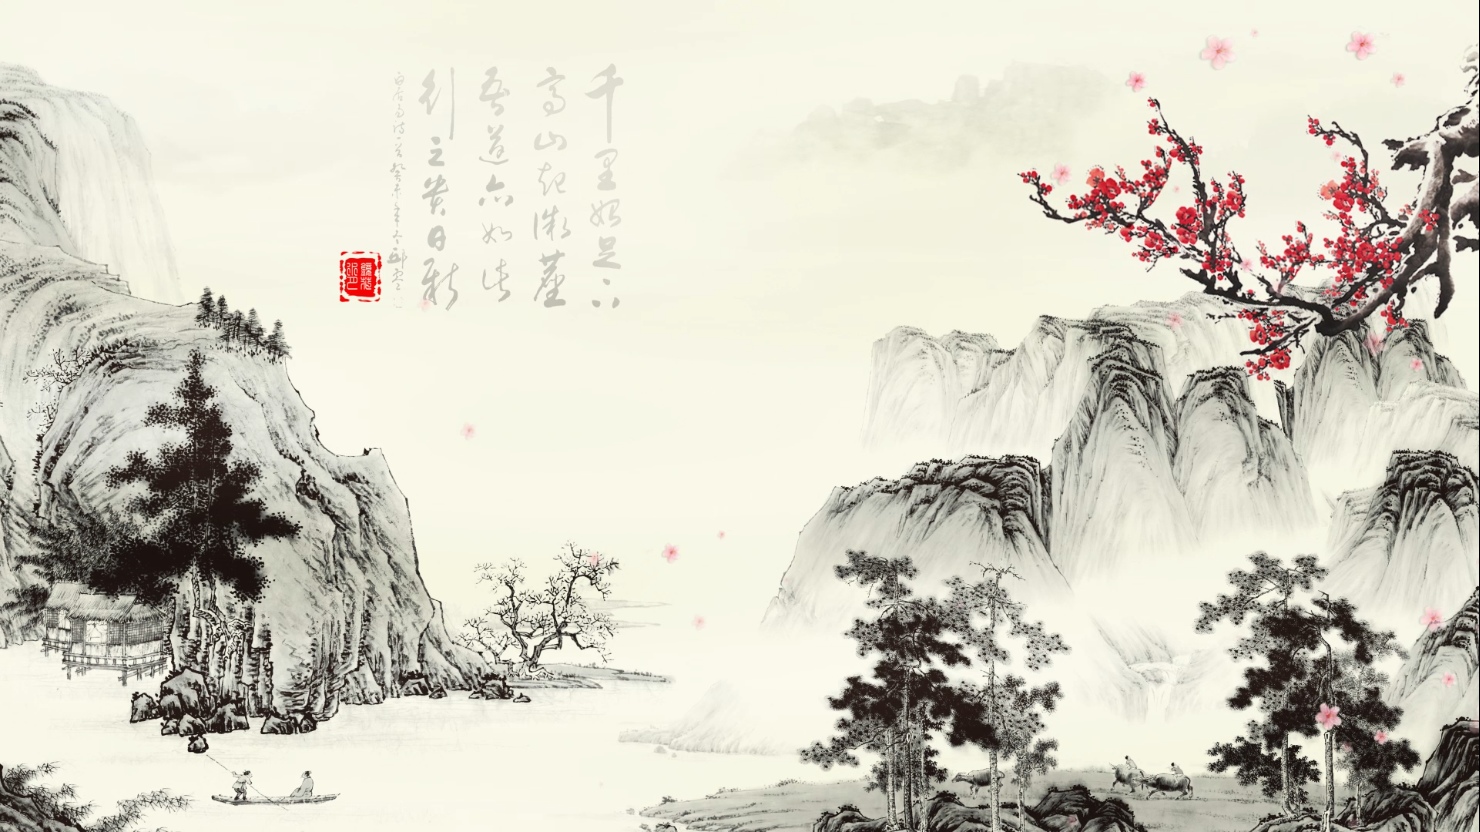 Chinese landscape painting Live Wallpaper by ice-wind-wolf on